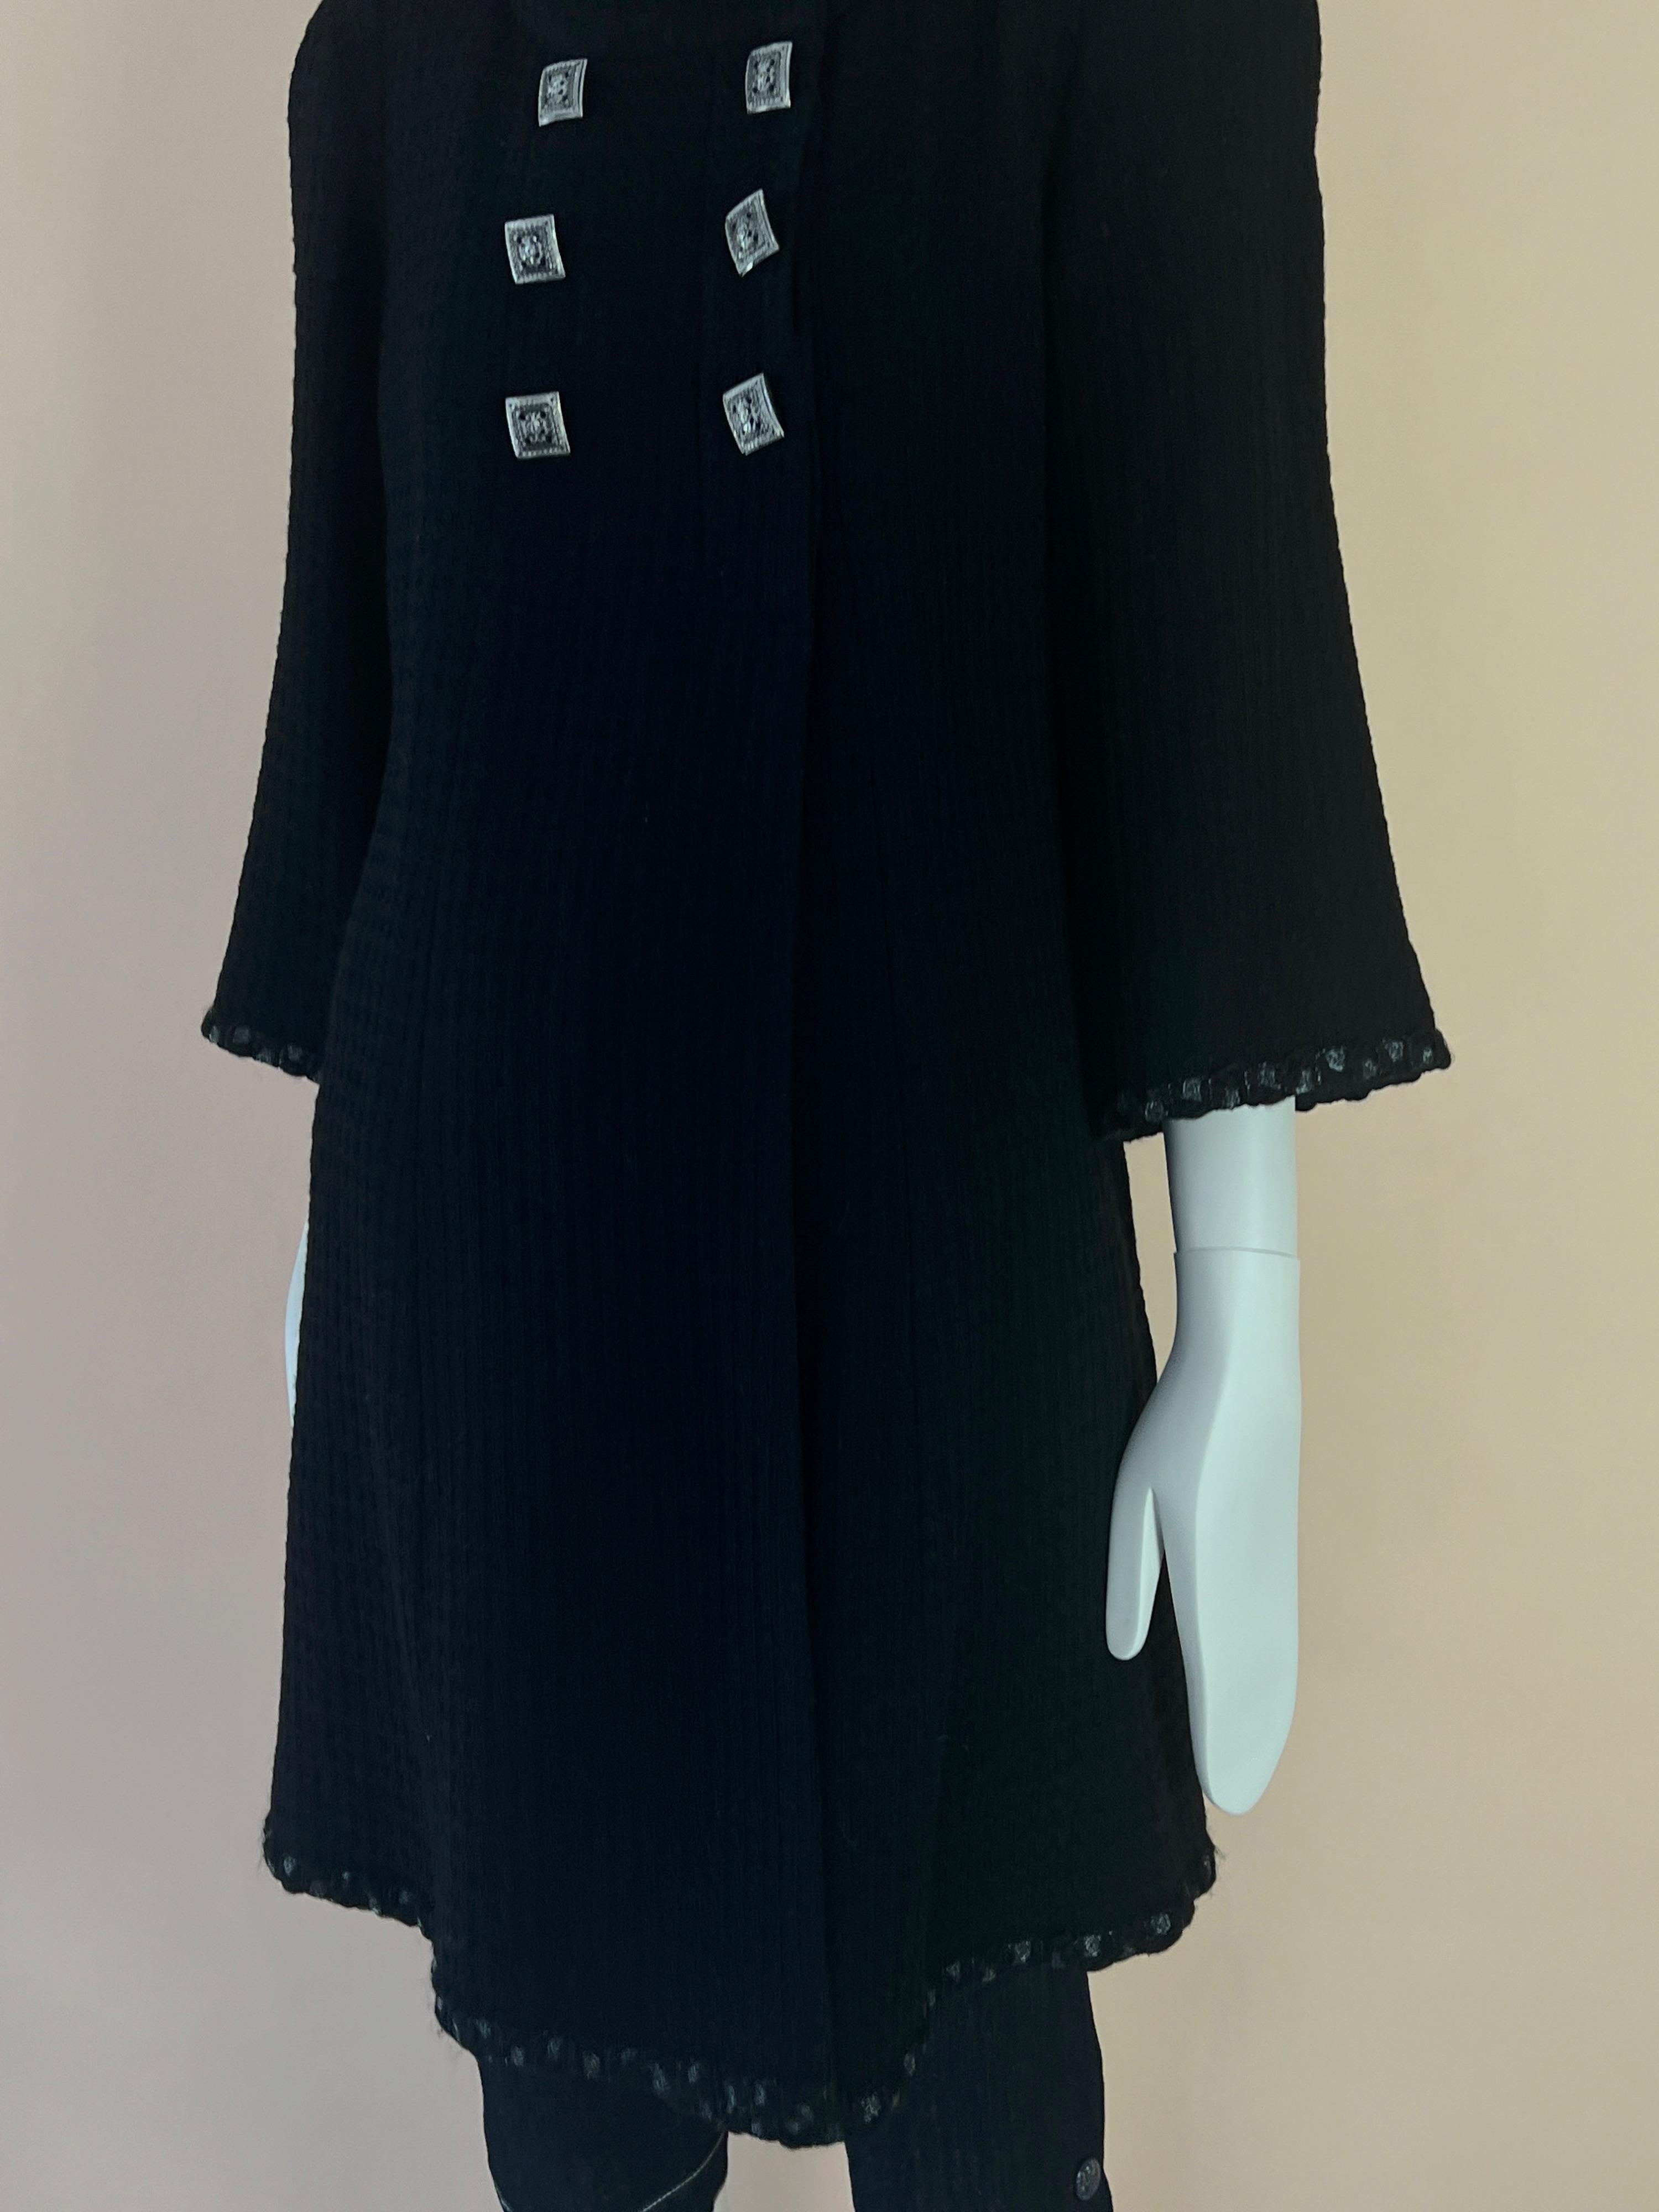 Chanel Byzance Collection Jewel Buttons Tweed Coat 3